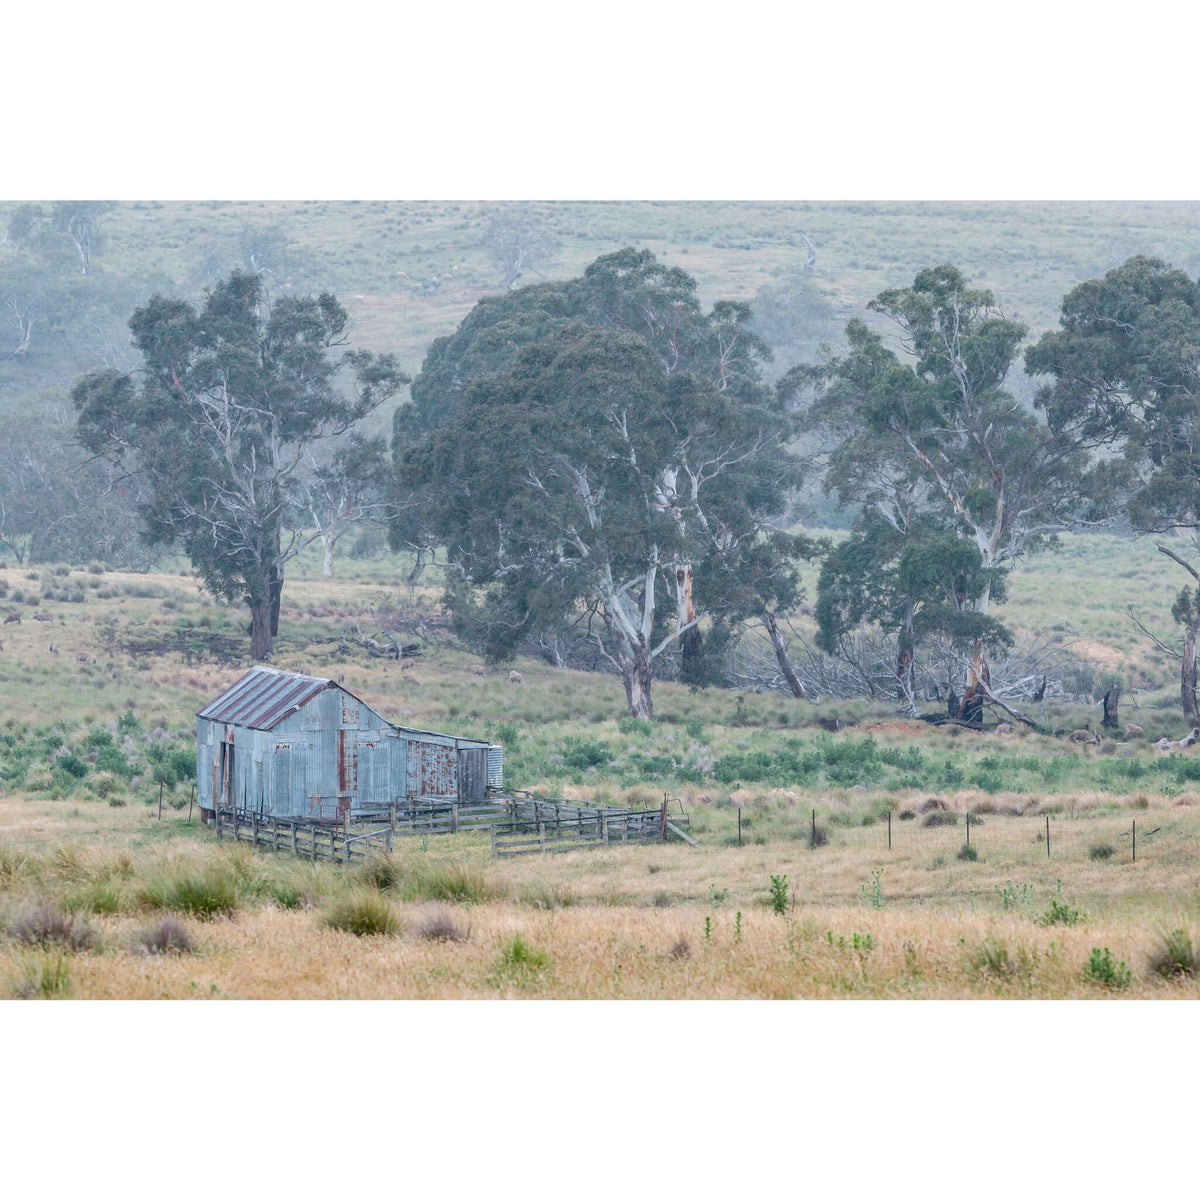 Crutching Shed in the Wet | The Woolshed Fine Art Print - Lost Collective Shop